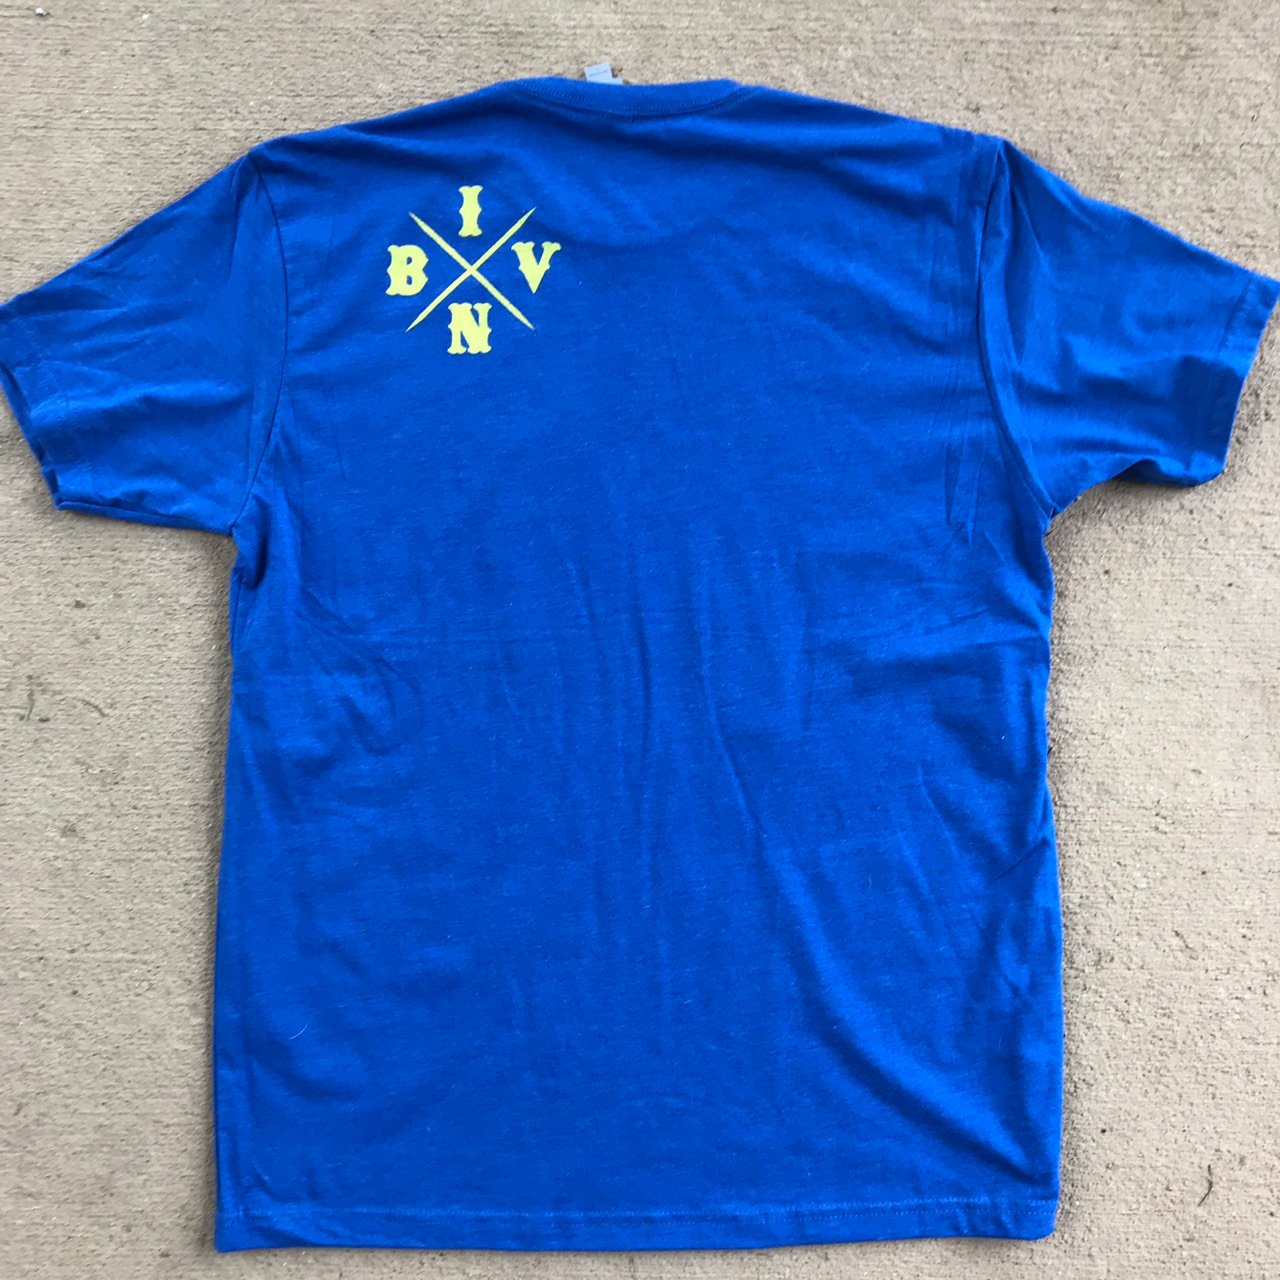 Image of BVIN Support Shirt - Blue and Gold